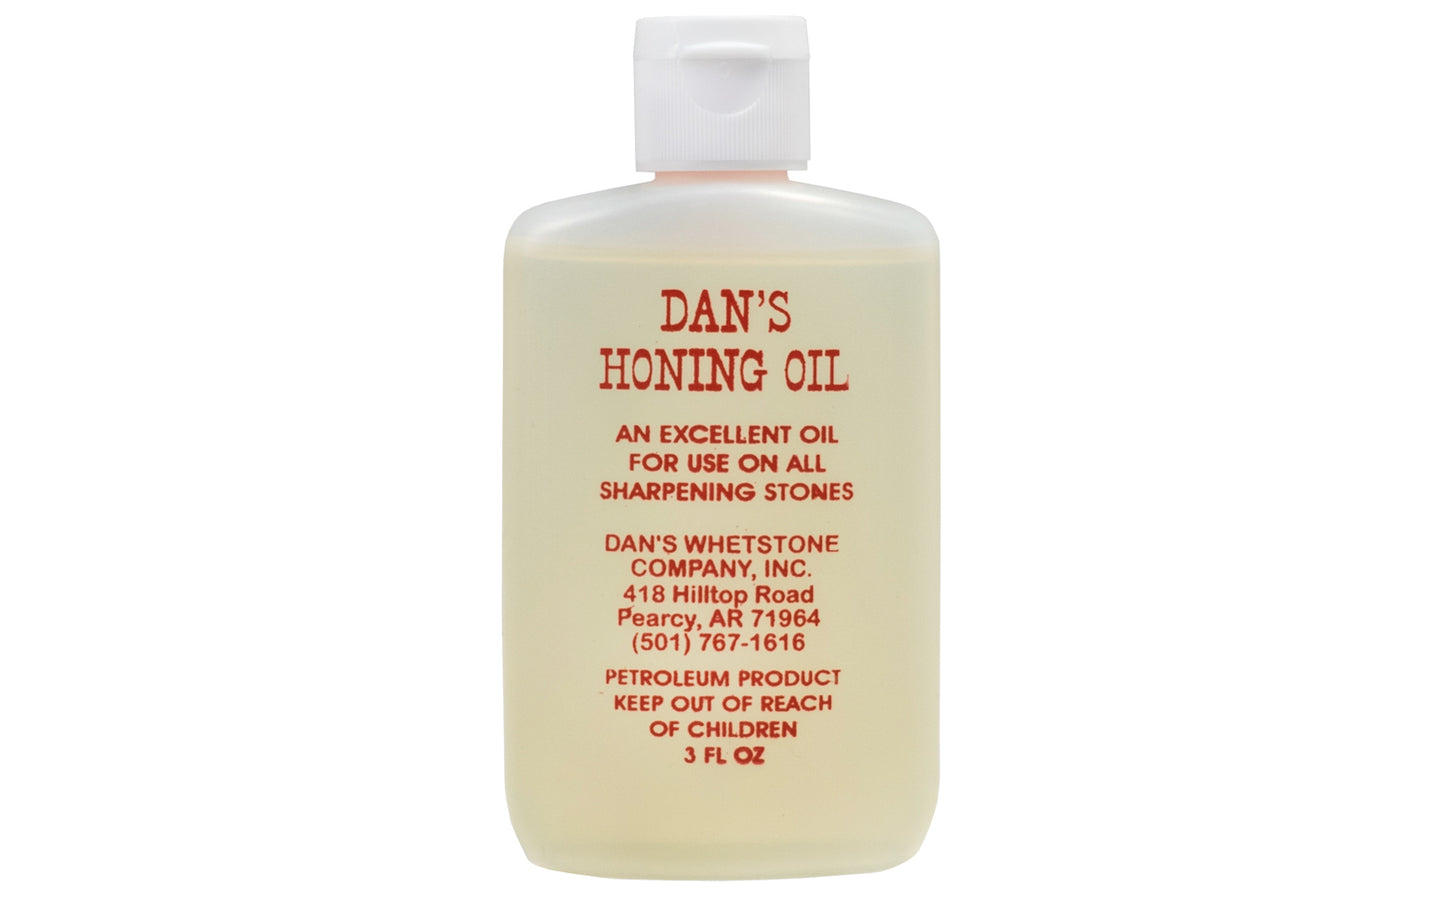 'Dan's Honing Oil ~ 3 oz' helps preserve your stones & prevents your stone from clogging from metal shavings. 3 oz bottle size. Made in USA.